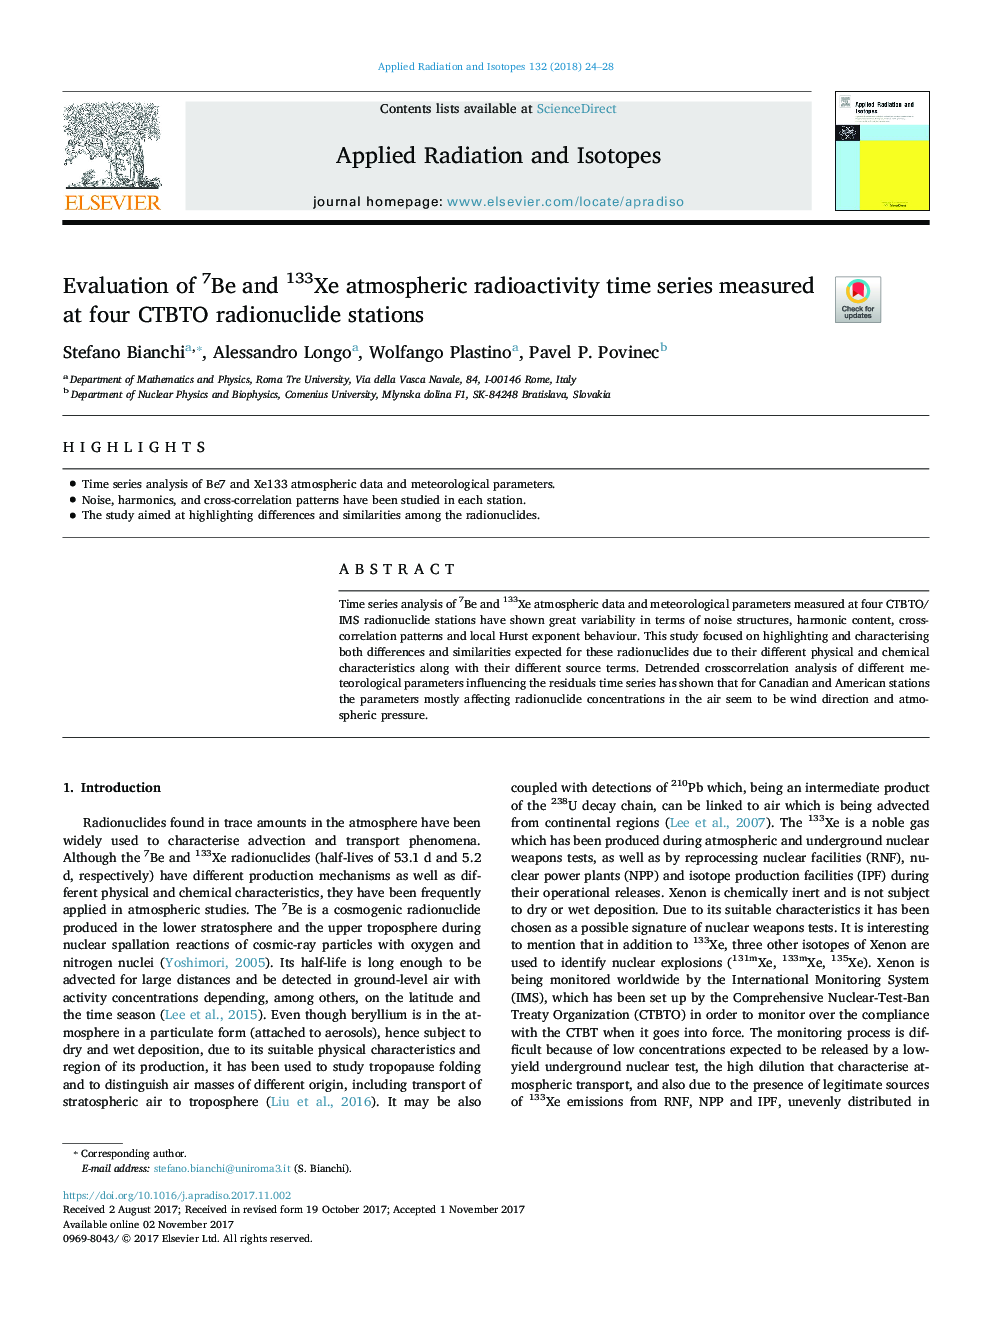 Evaluation of 7Be and 133Xe atmospheric radioactivity time series measured at four CTBTO radionuclide stations